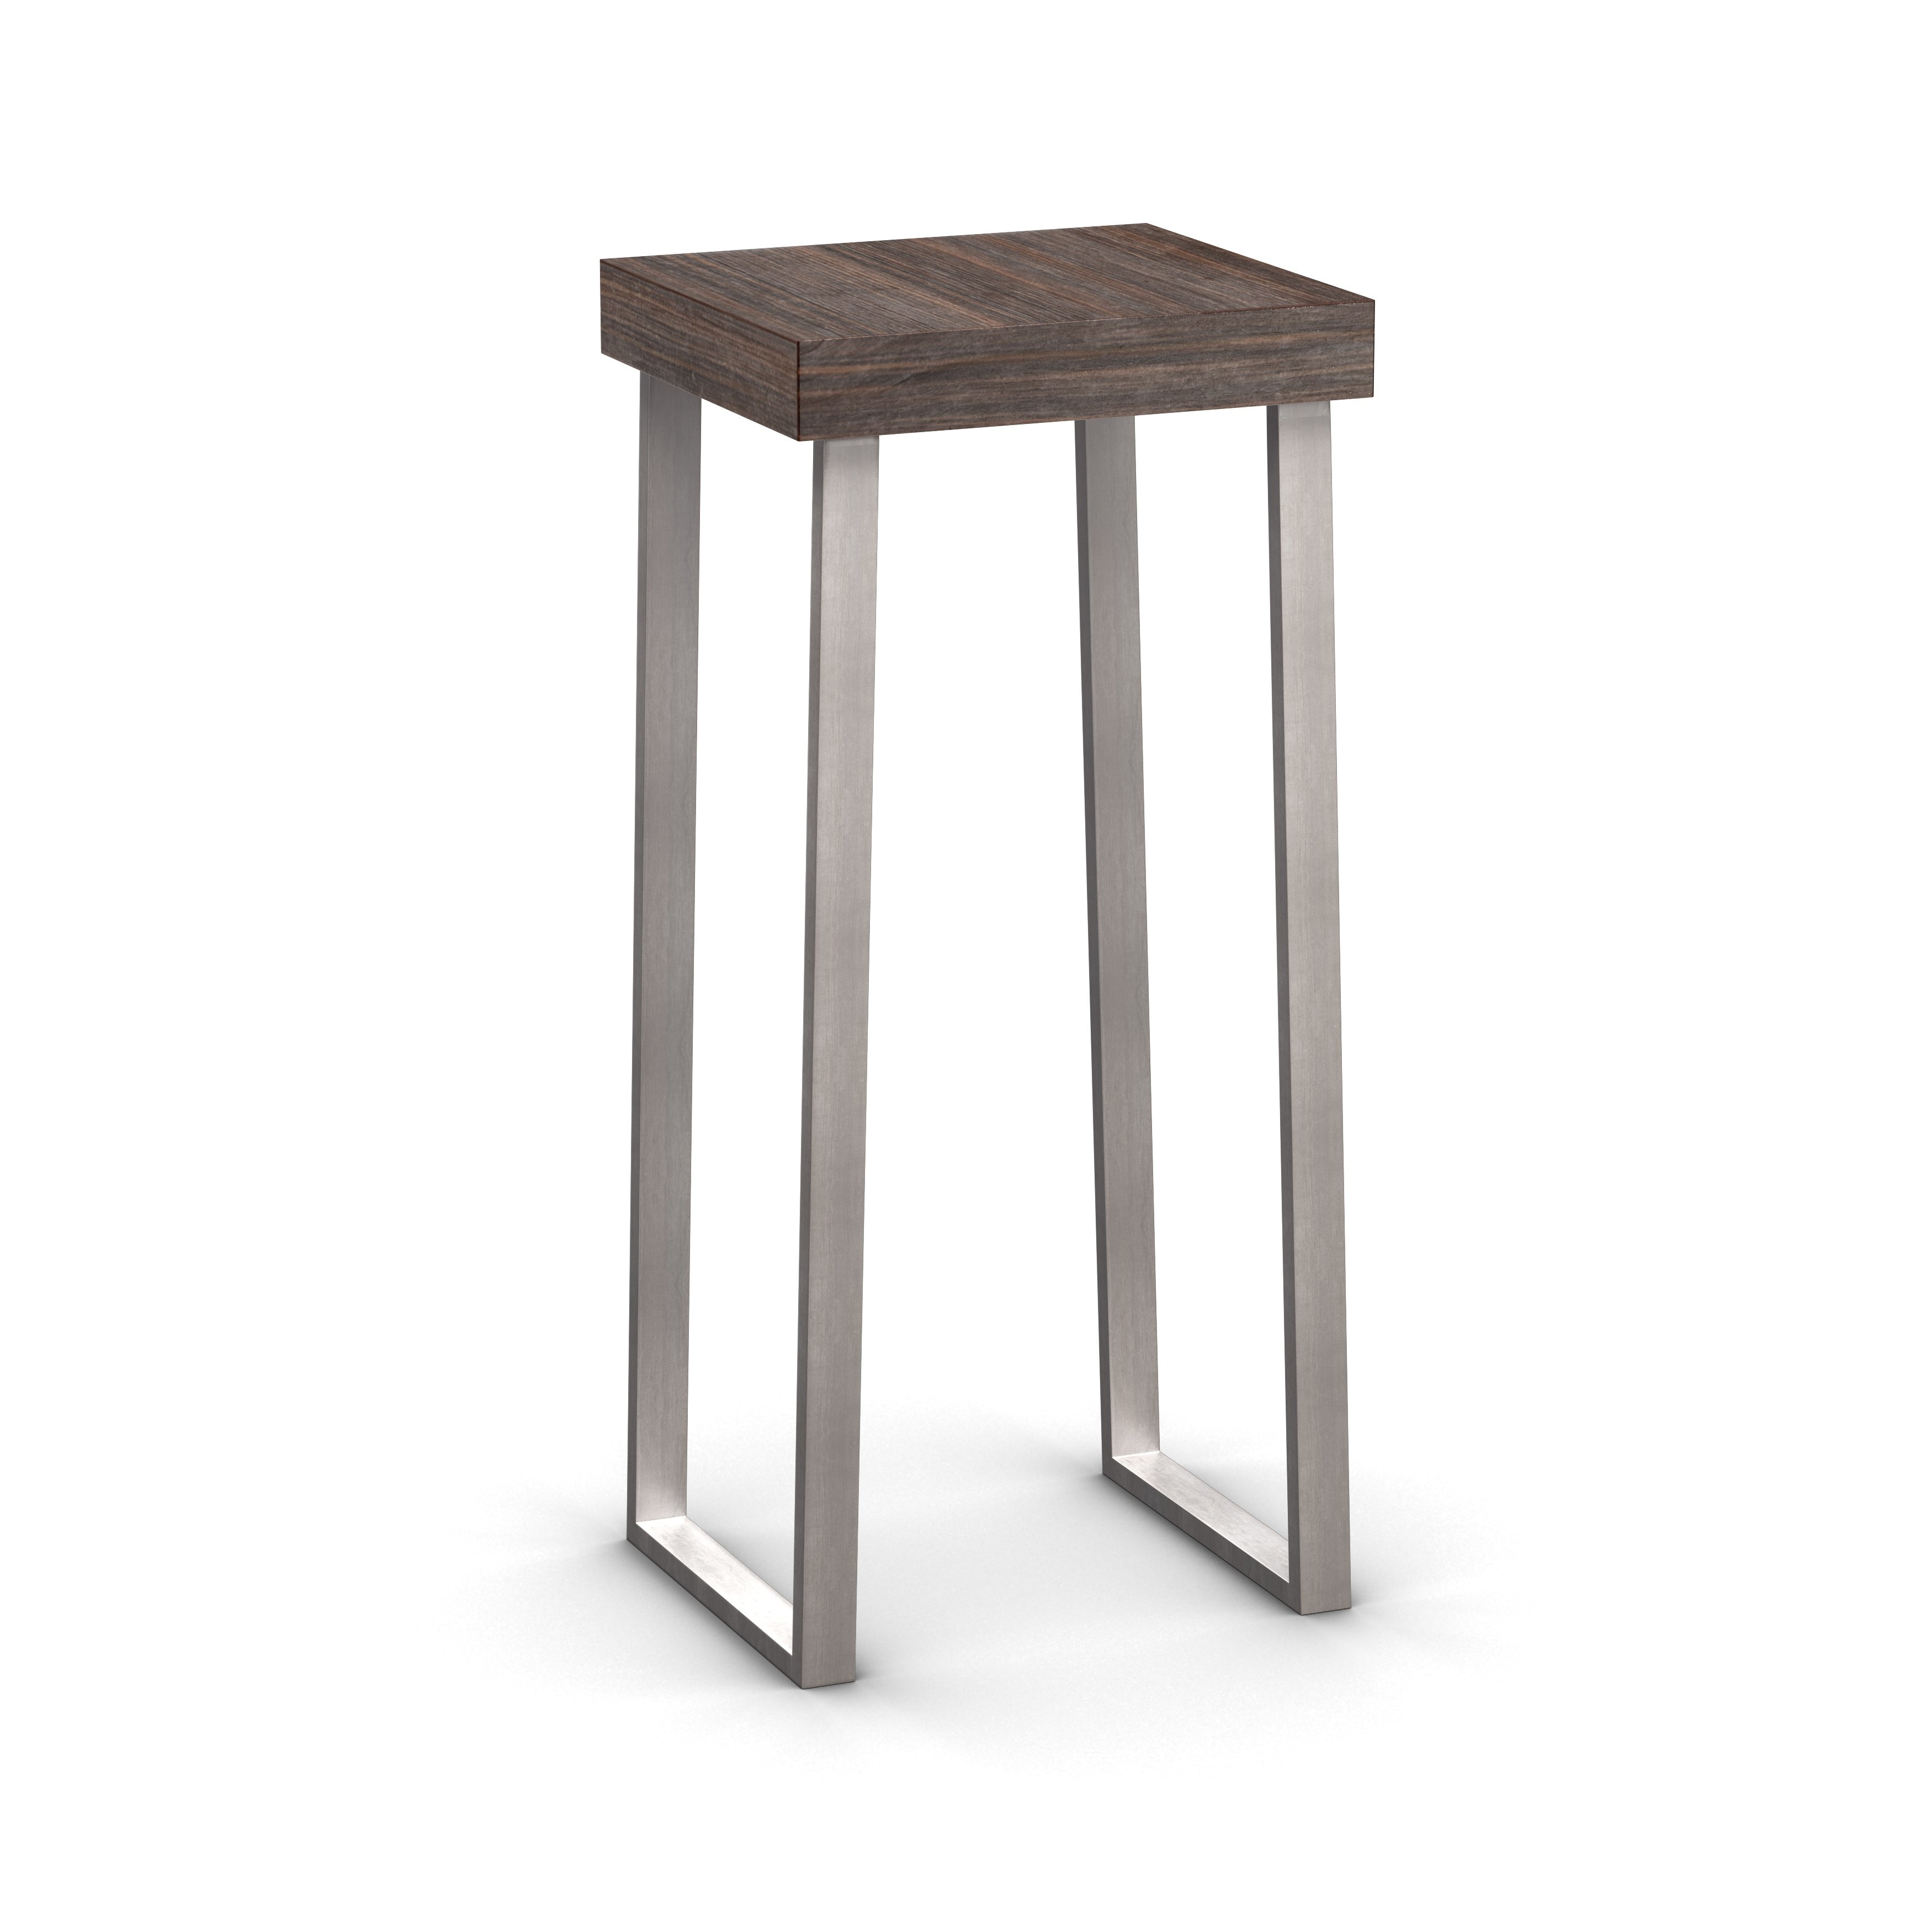 carbon loft murdock pedestal accent table free tall round shipping today very narrow coffee ikea childrens furniture storage beach themed cube side hairpin leg desk console with